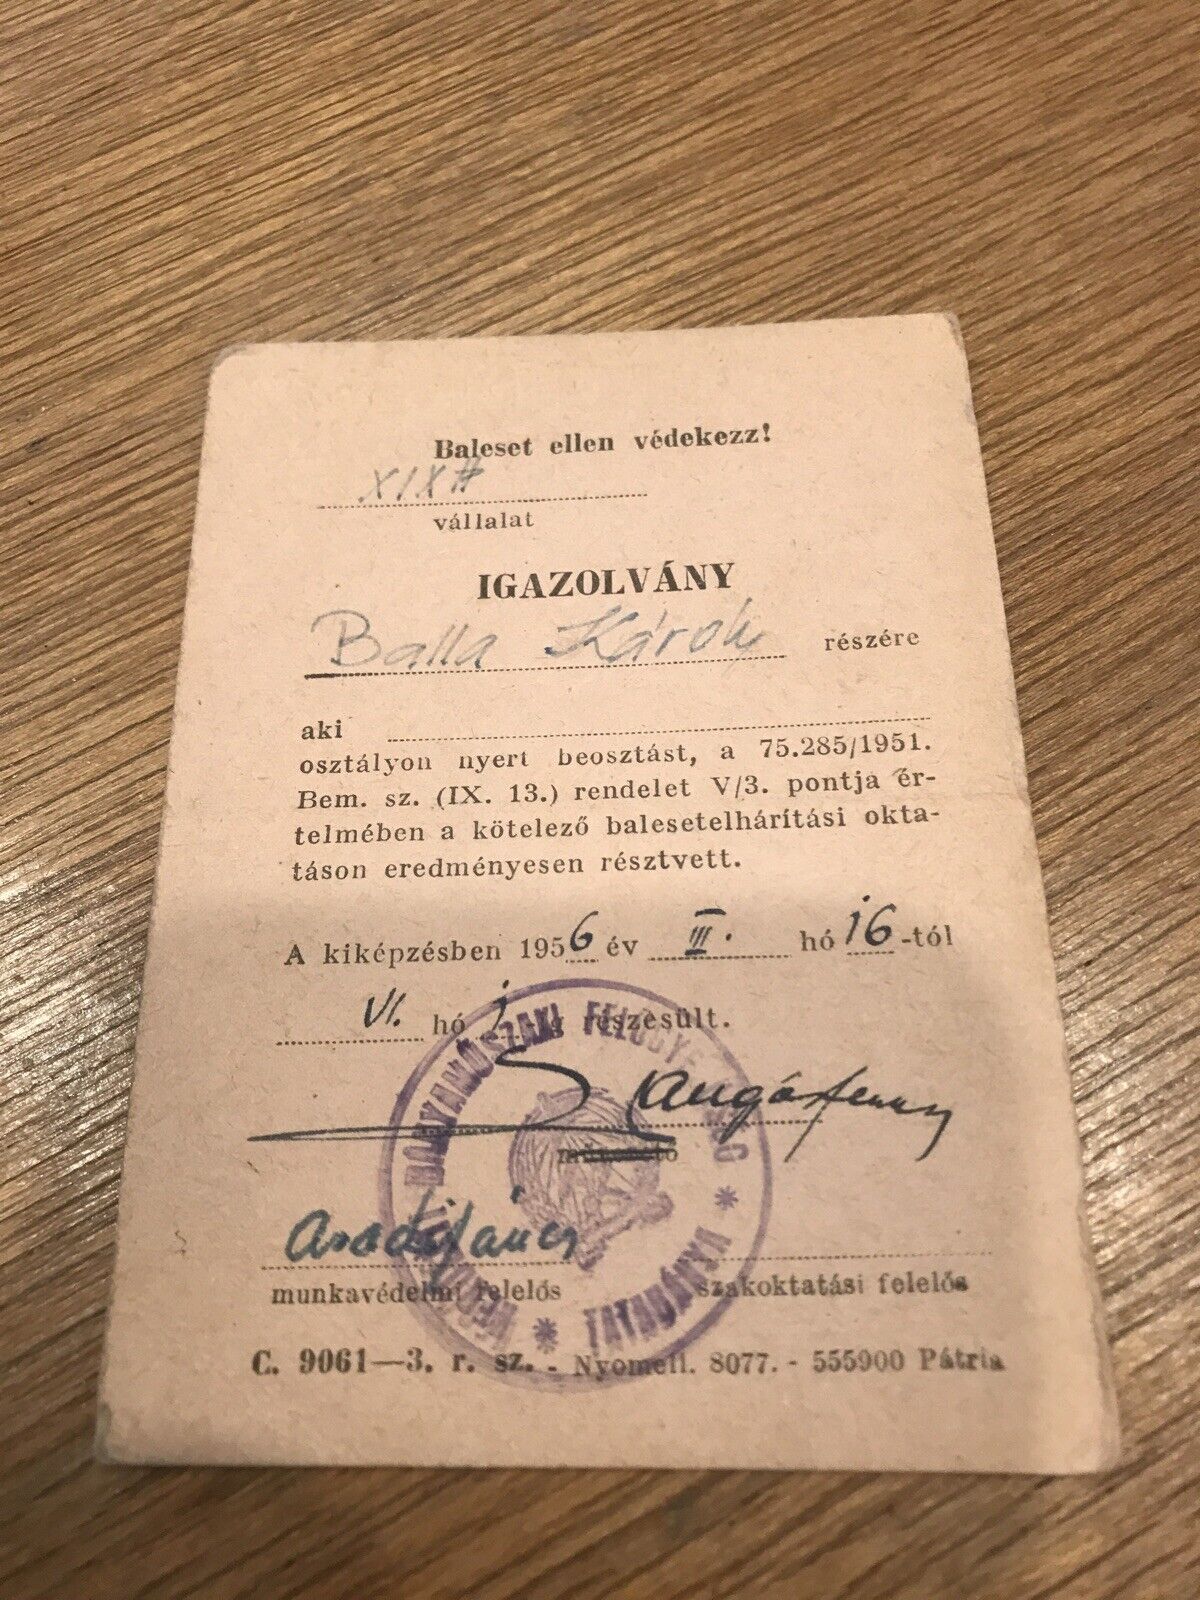 *RARE* 1956 Hungarian State Document Balla Karoly Safety Certification Communist